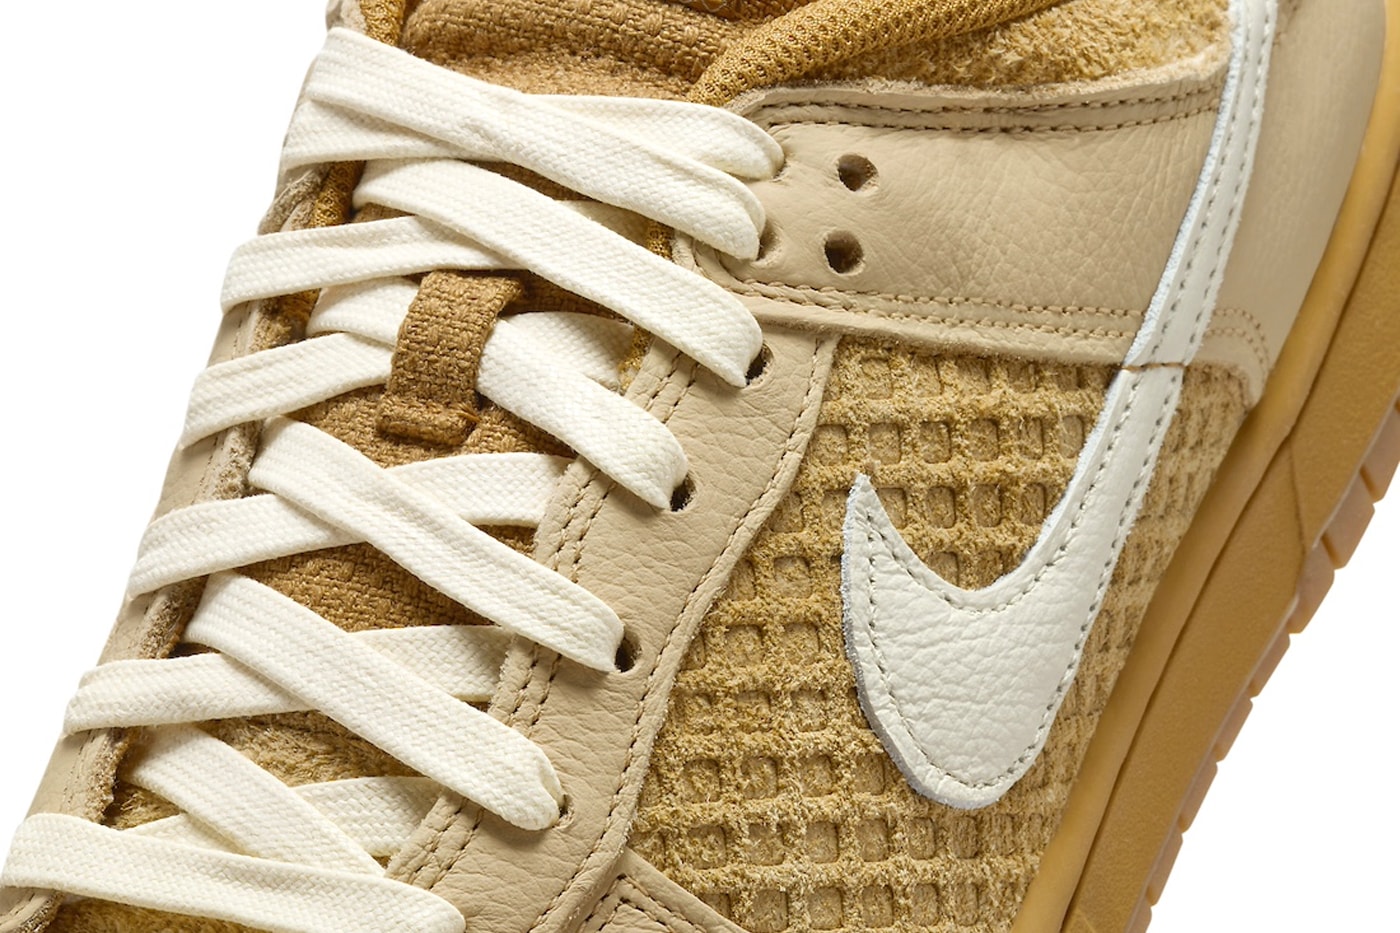 Official Look at the Nike Dunk Low "Waffle" Wheat/Coconut Milk-Sesame-Black-Total Orange FZ4041-744 swoosh low top classic sneakers